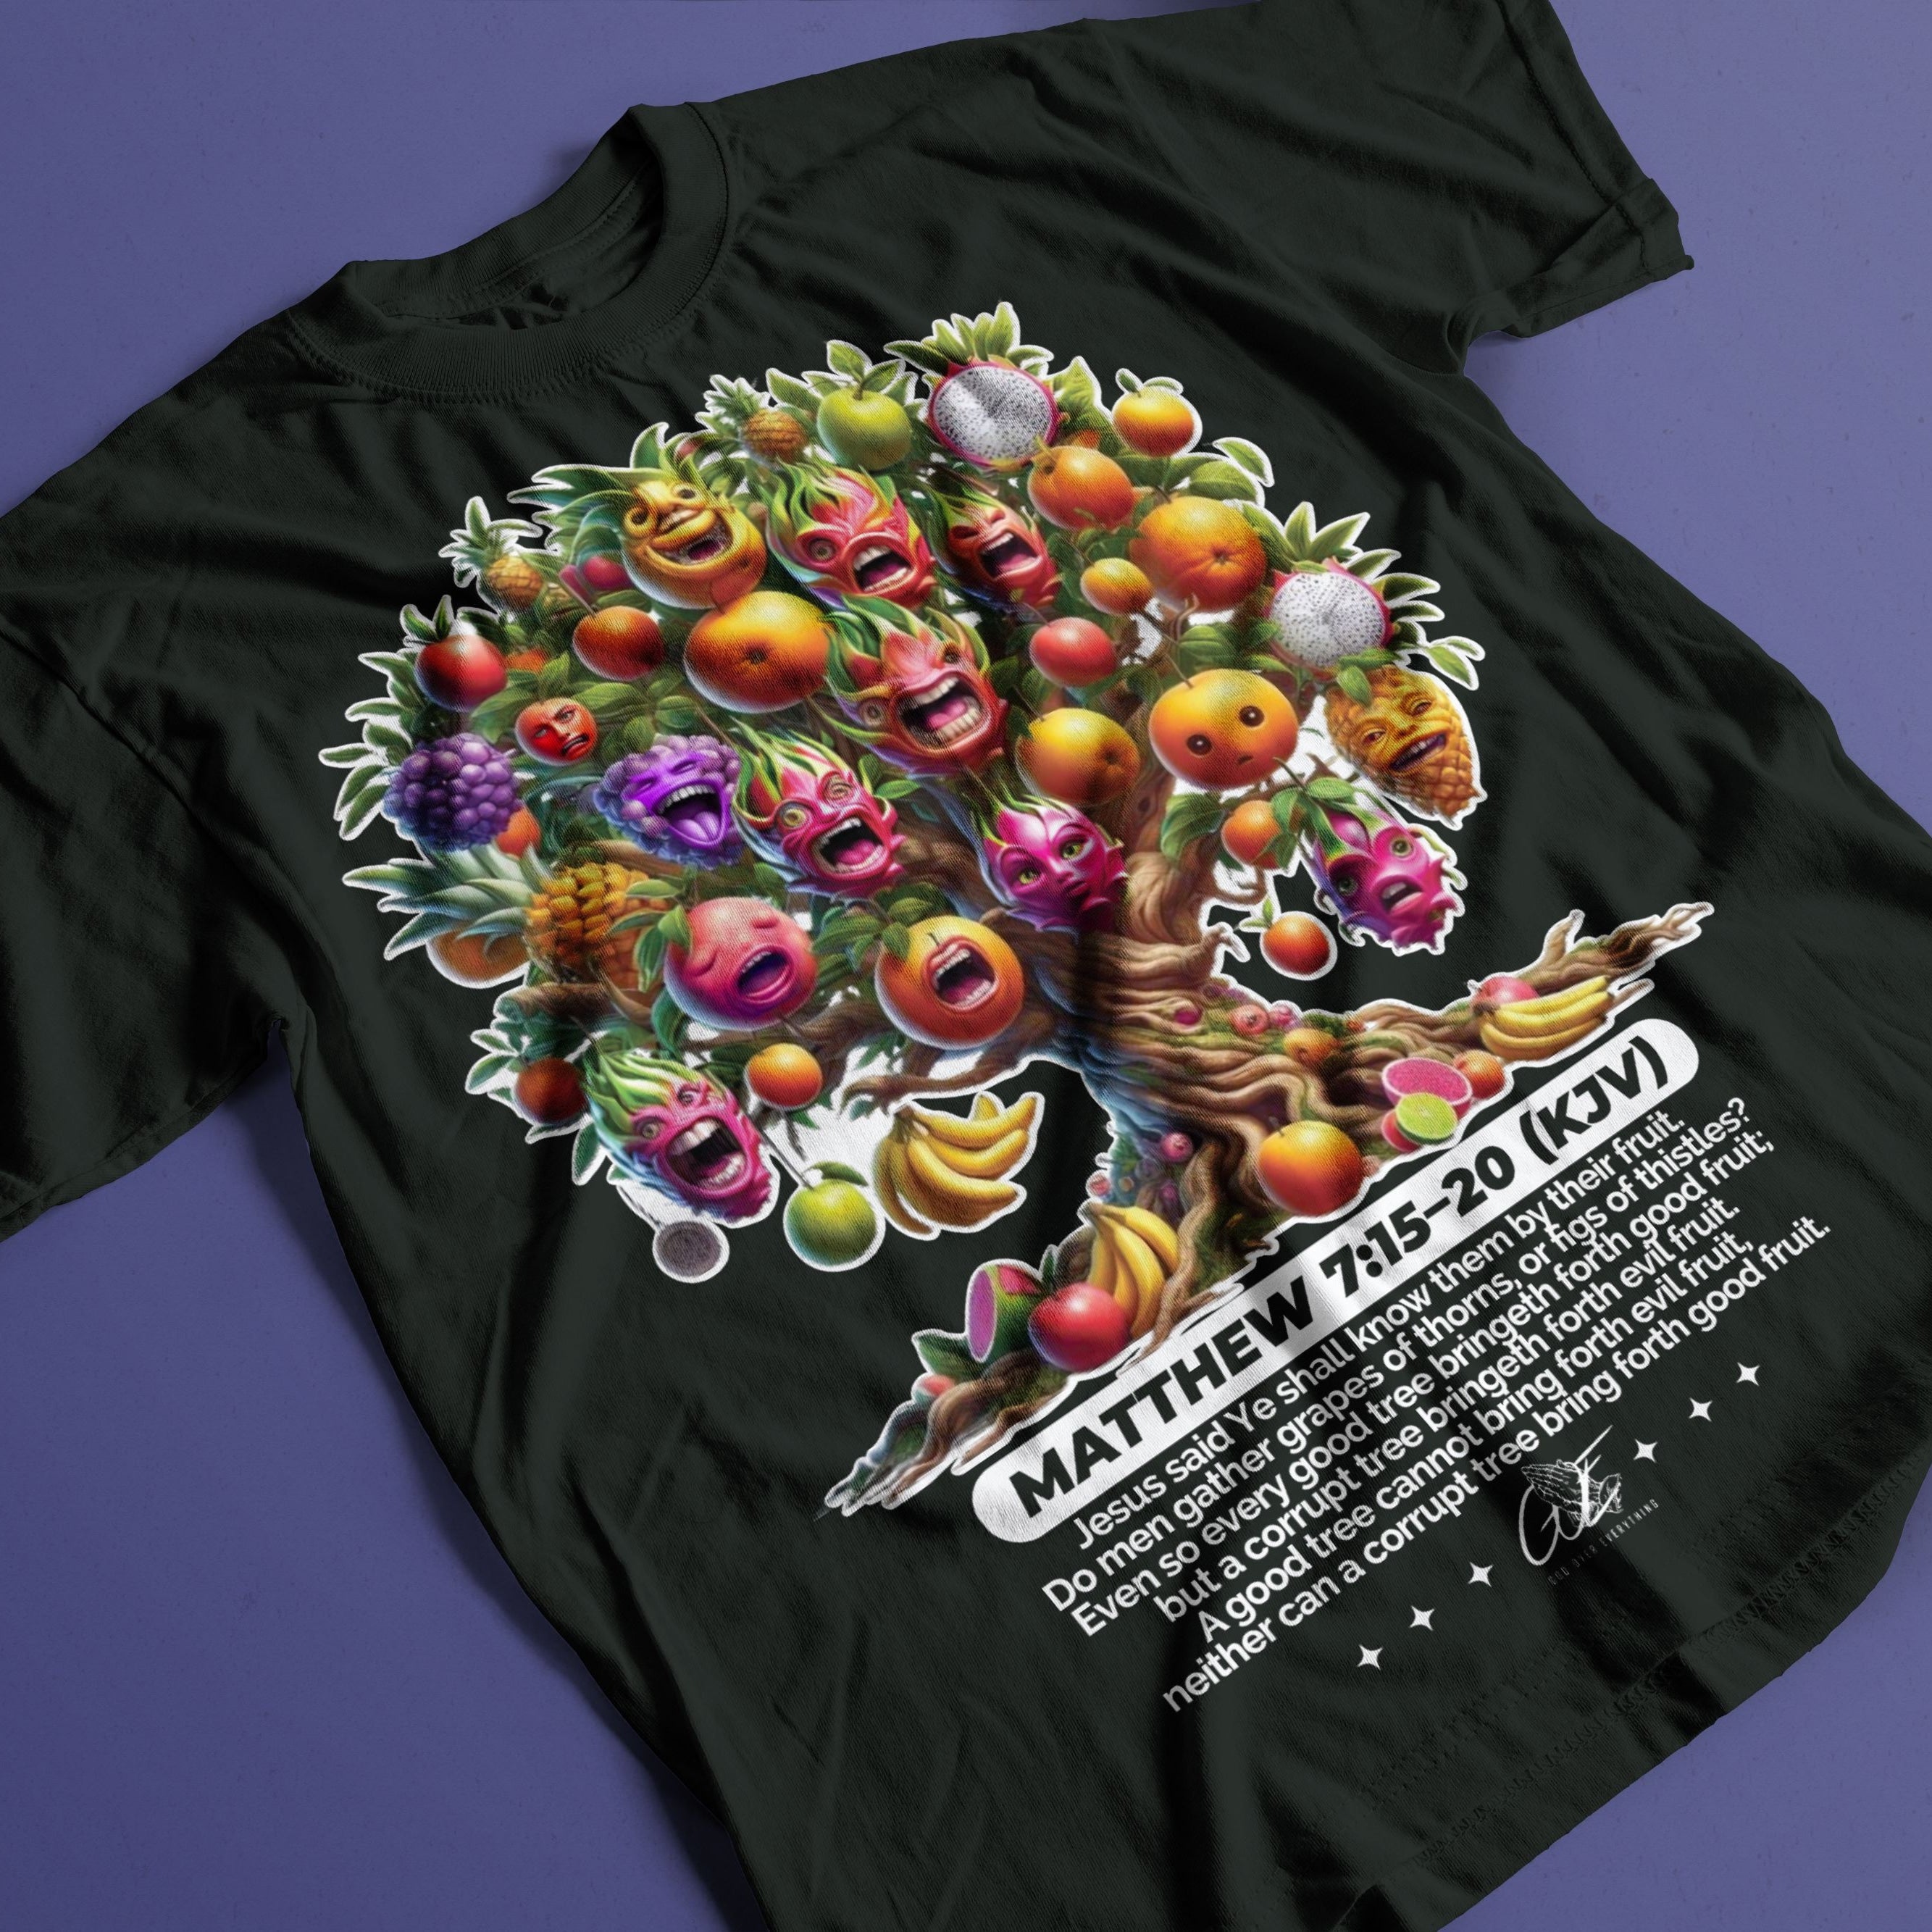 By their fruit tee